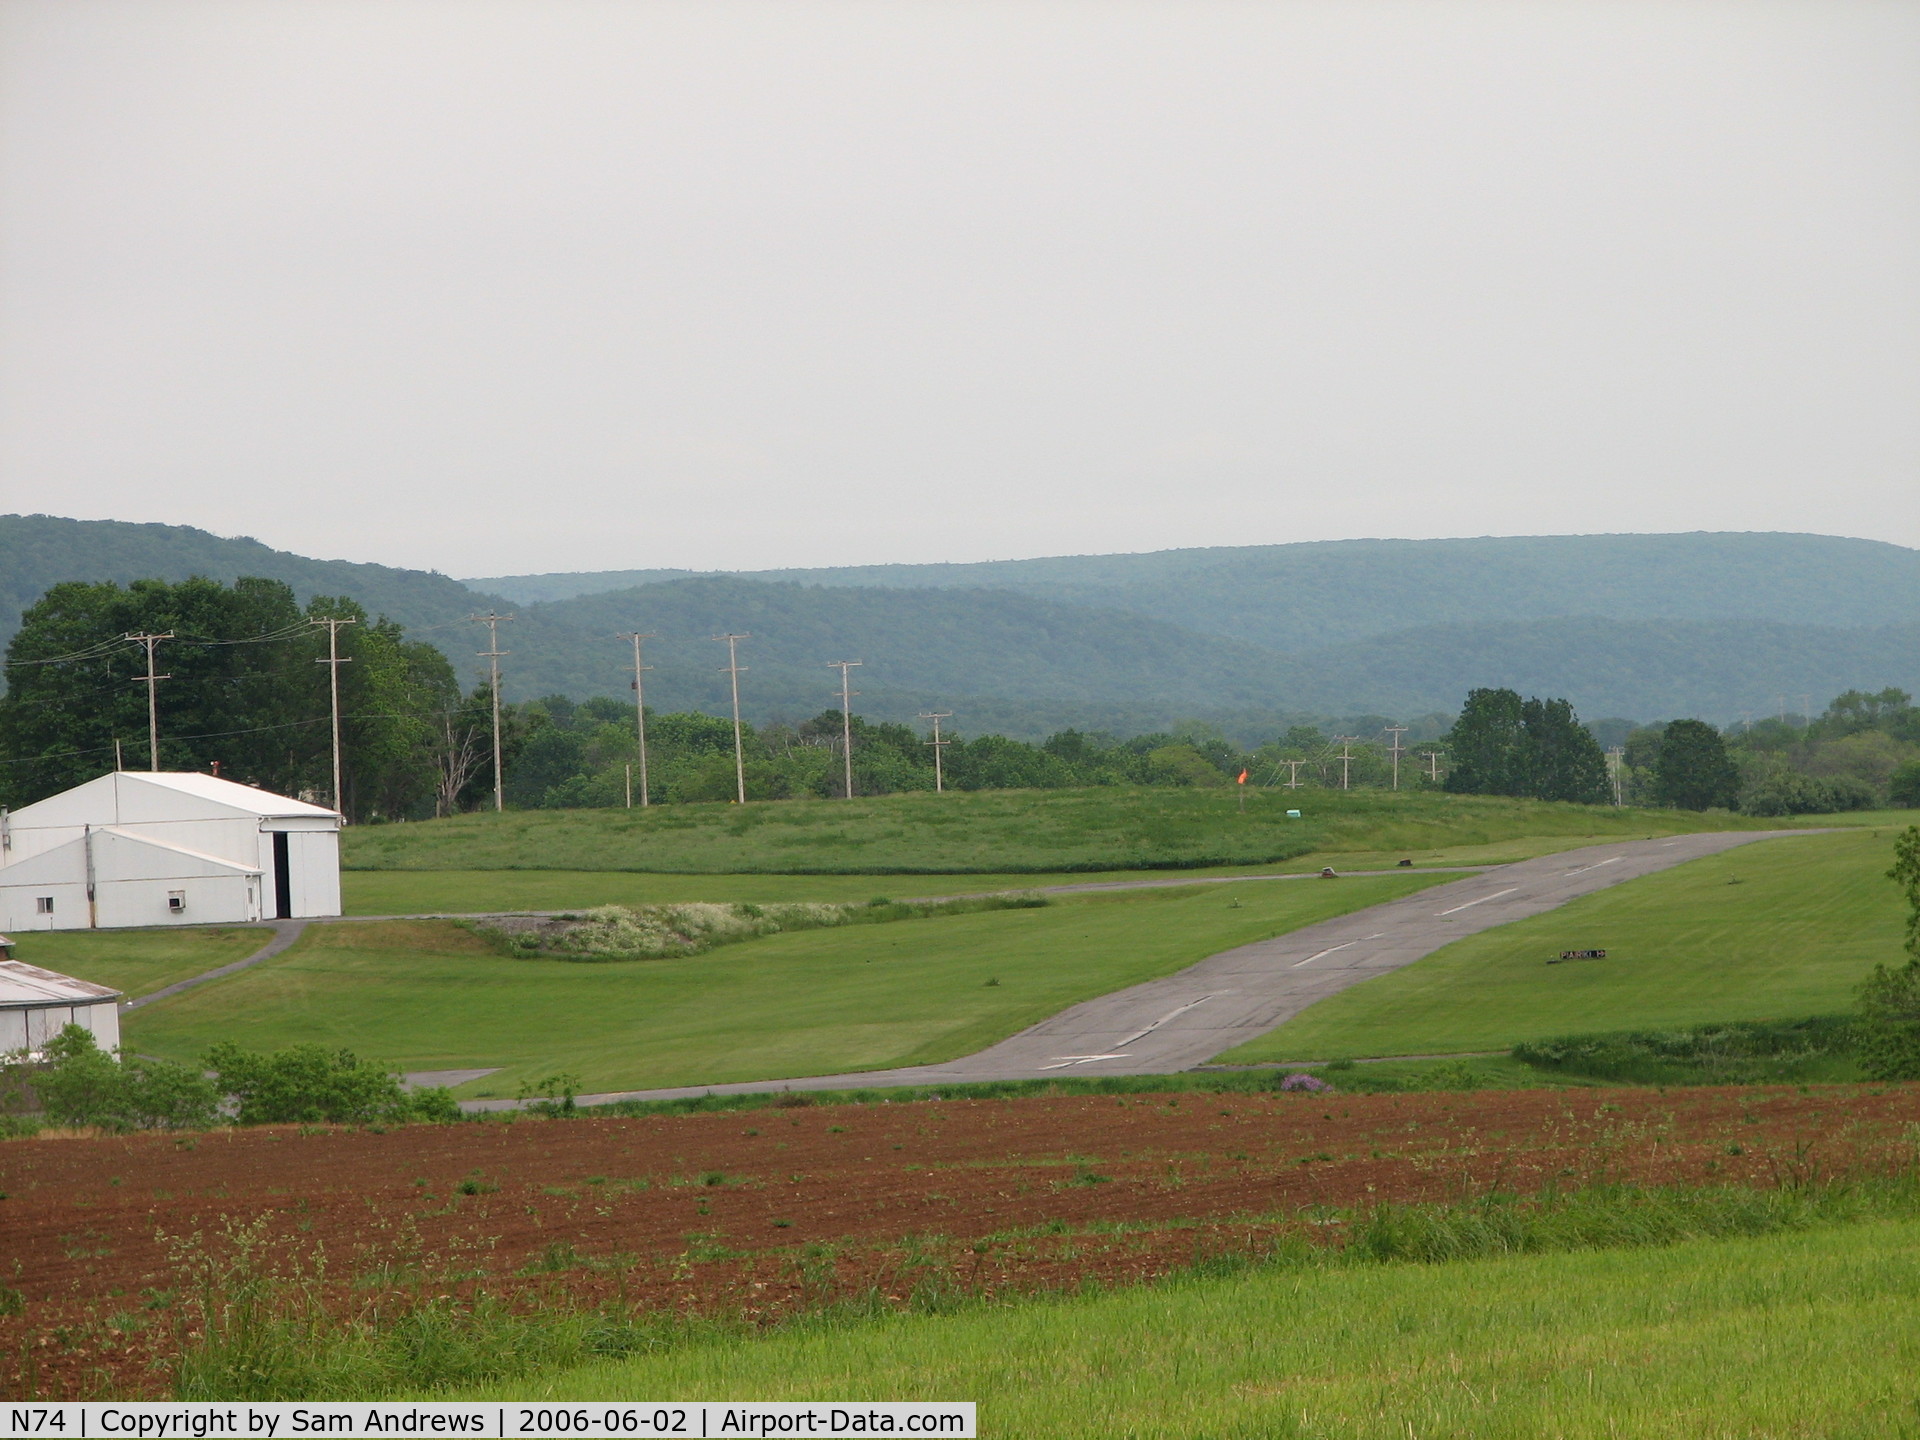 Penns Cave Airport (N74) - Looking east from the next hill over